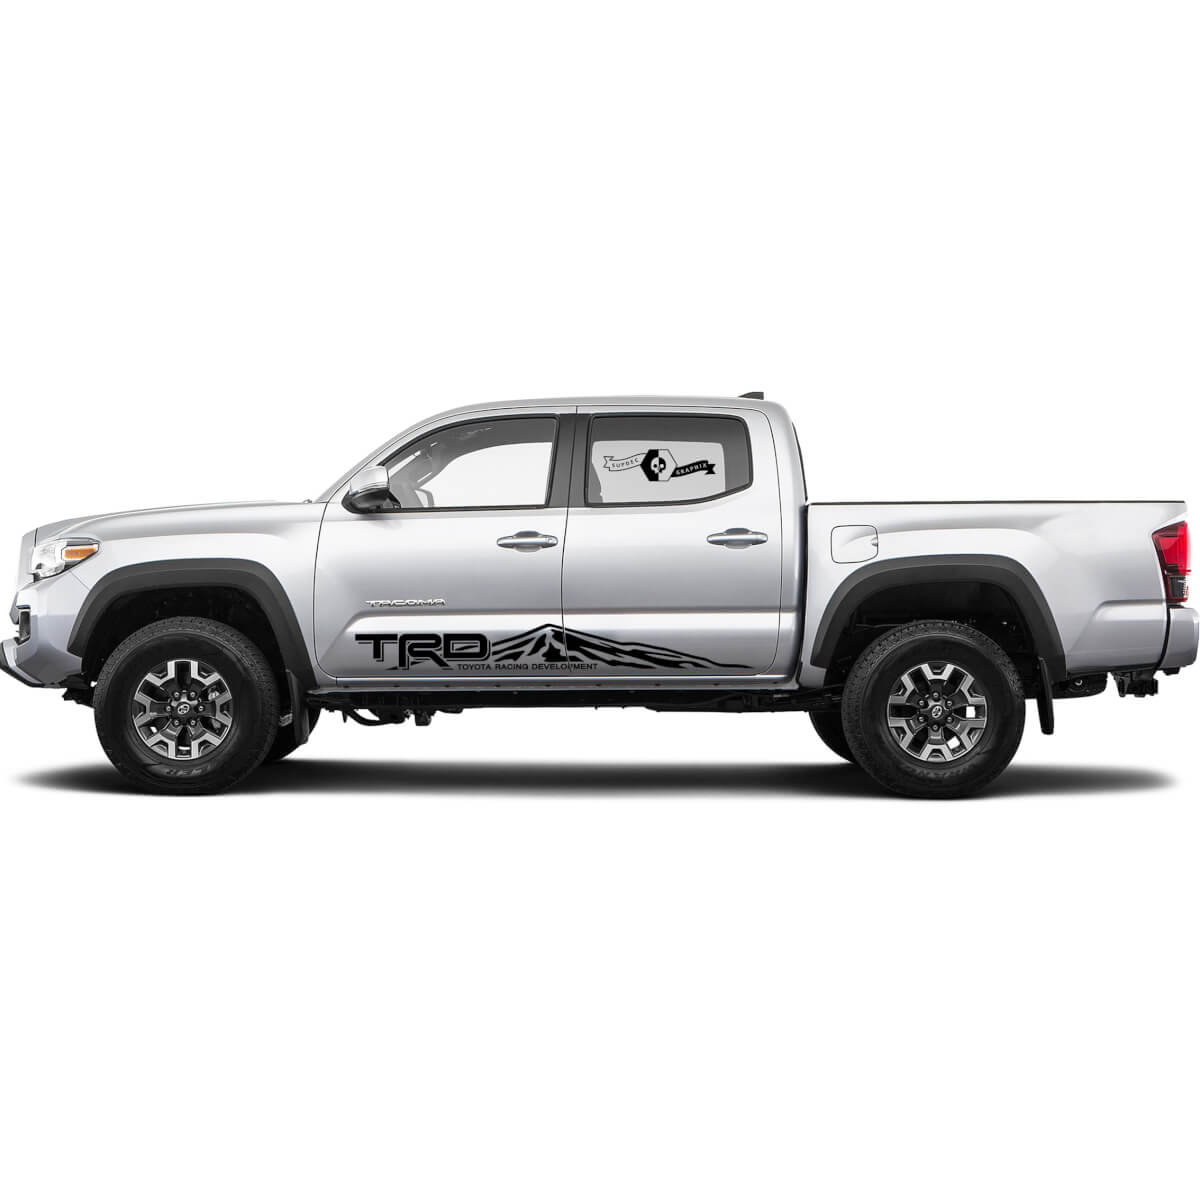 TRD Toyota Racing Mountains Style for Rocker Panel Decals Stickers for Tacoma FJ Cruiser Tundra Hilux 4Runner 2